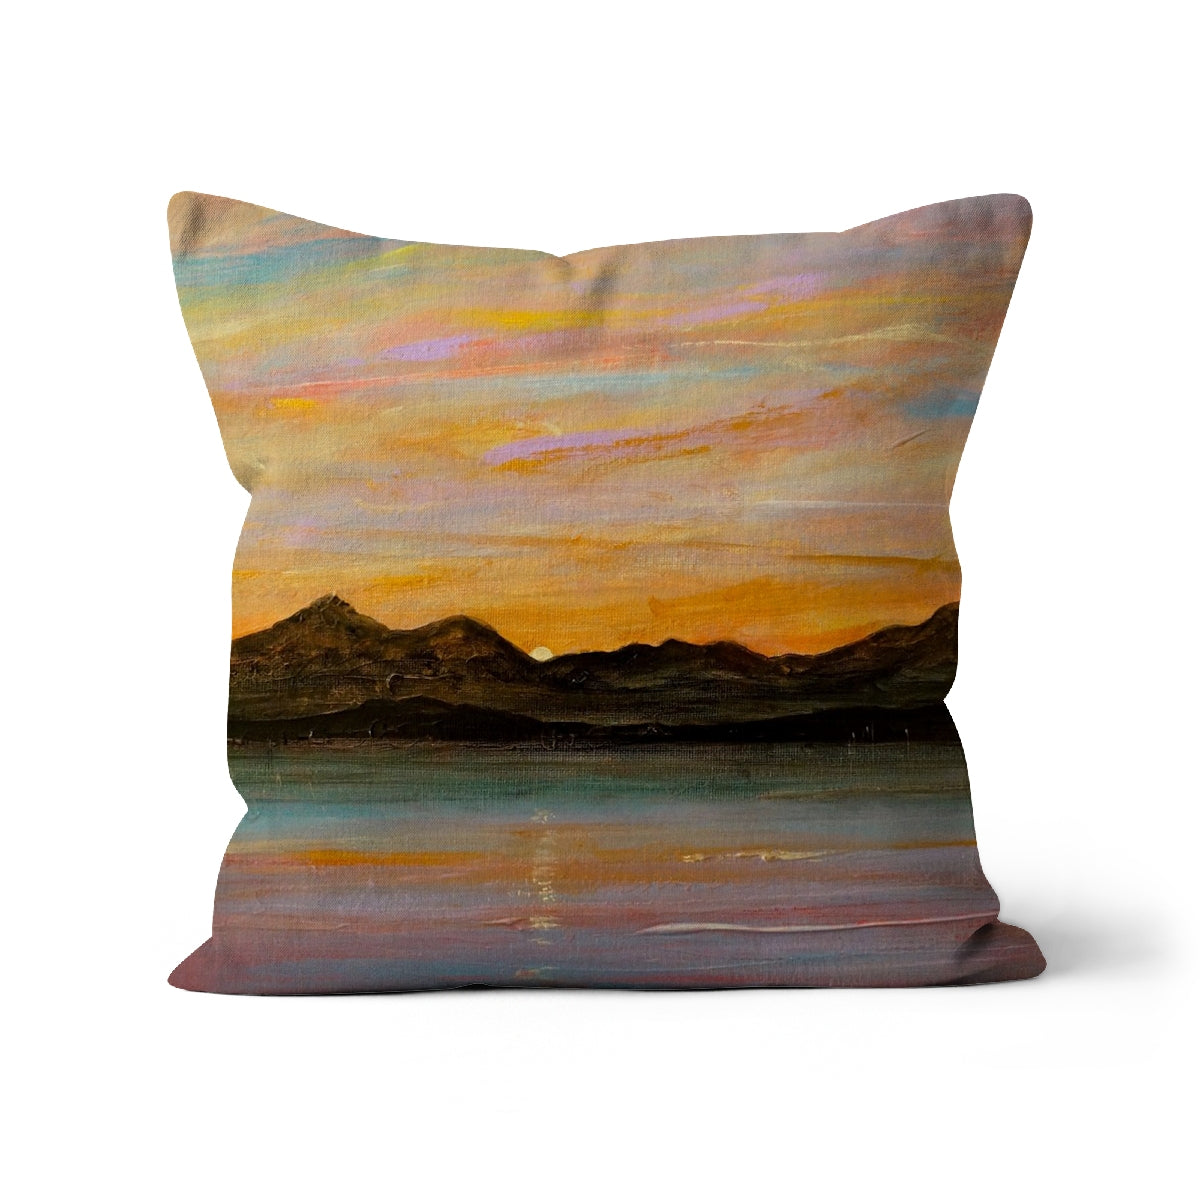 The Sleeping Warrior Arran Art Gifts Cushion-Cushions-Arran Art Gallery-Canvas-16"x16"-Paintings, Prints, Homeware, Art Gifts From Scotland By Scottish Artist Kevin Hunter